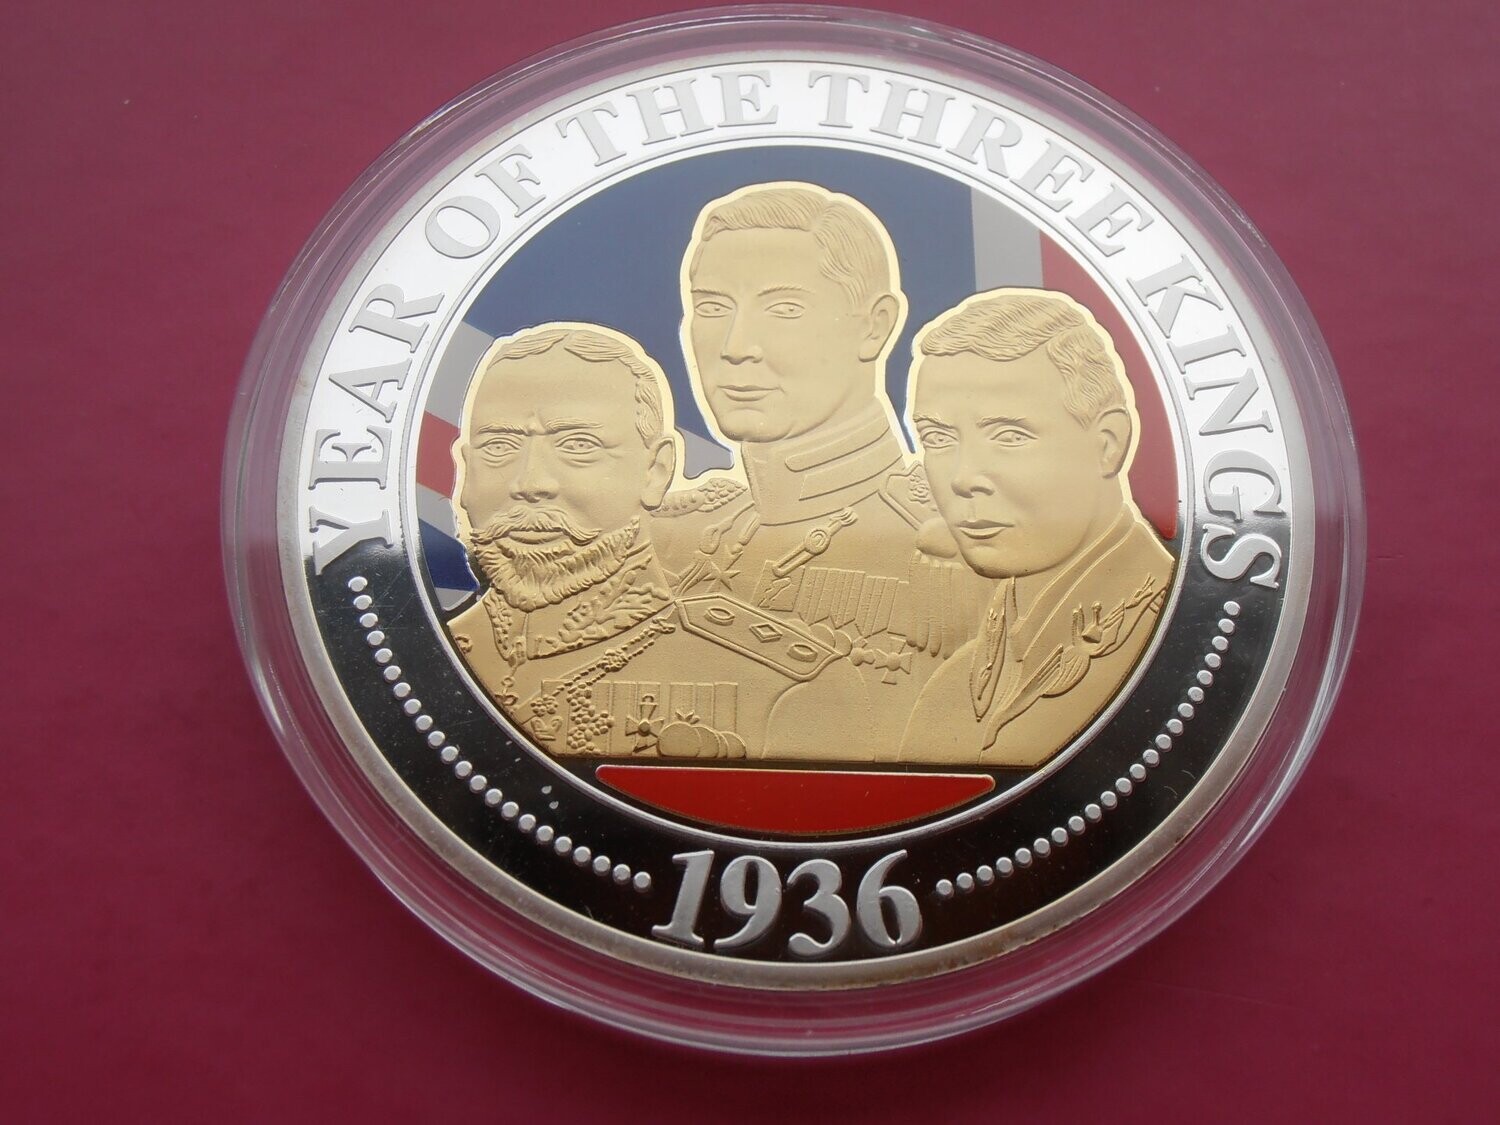 Year of the Three Kings Medal - 2011